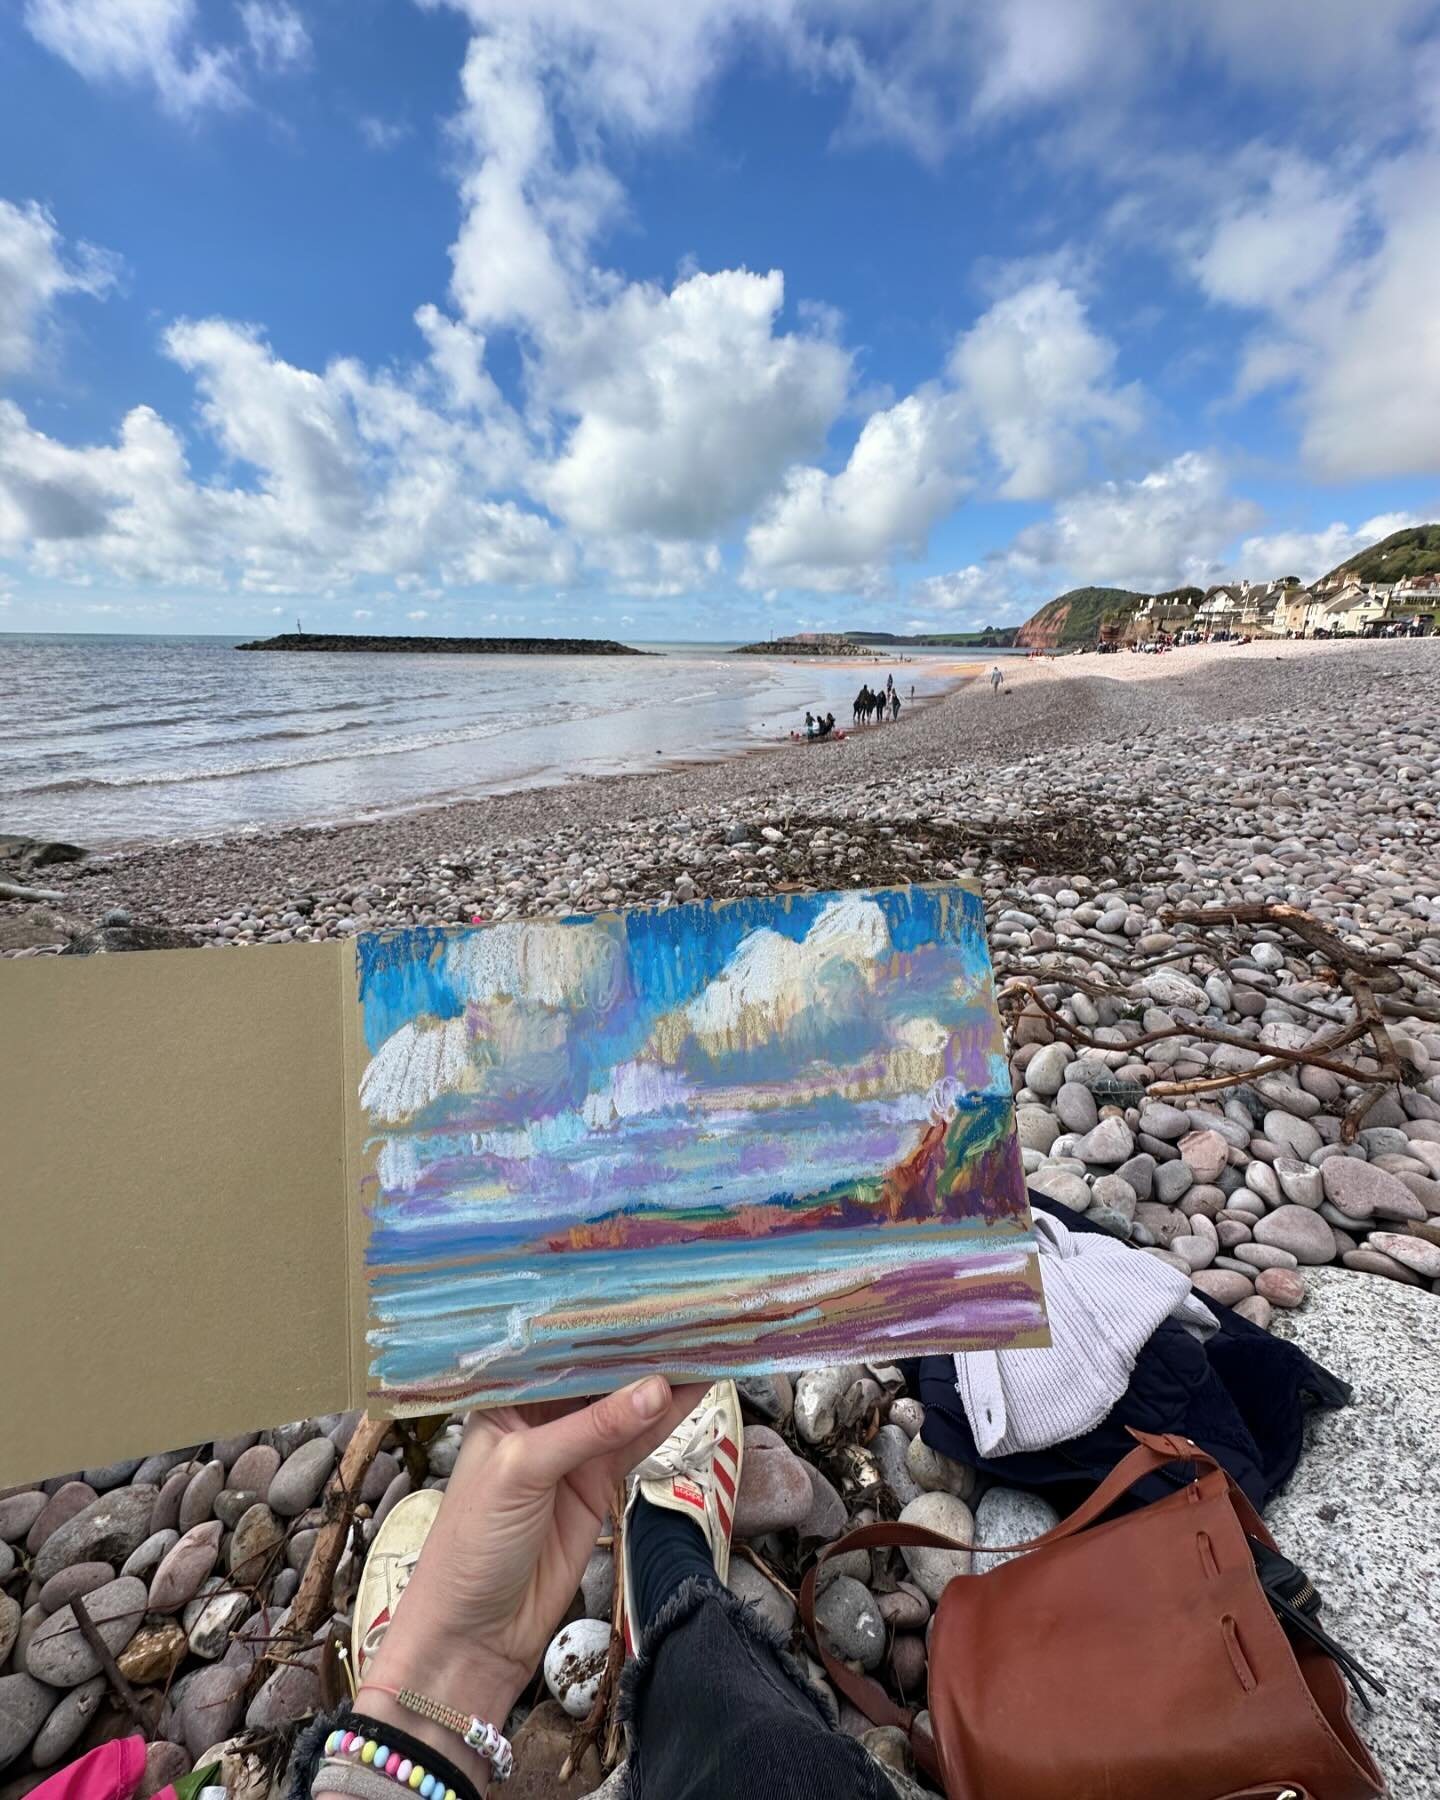 🌊 H E A V E N in D E V O N 🌊

A long weekend in Devon: I have a commission down here so decided to tie it in with bringing my little team, having not been away together for too long. 

Days filled with swimming in mermaid tails, soaking in view aft